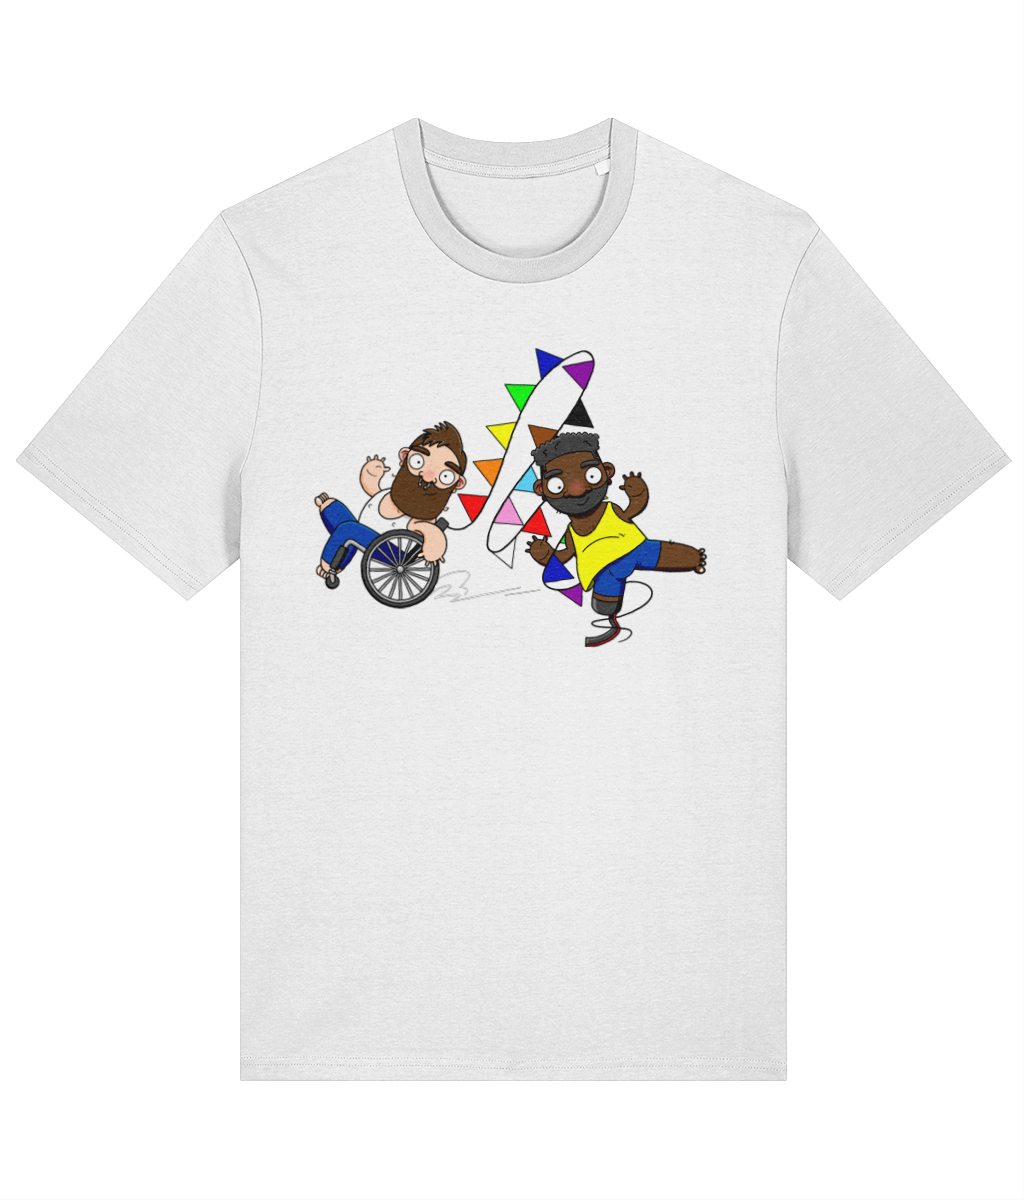 Racing with Pride T-Shirt